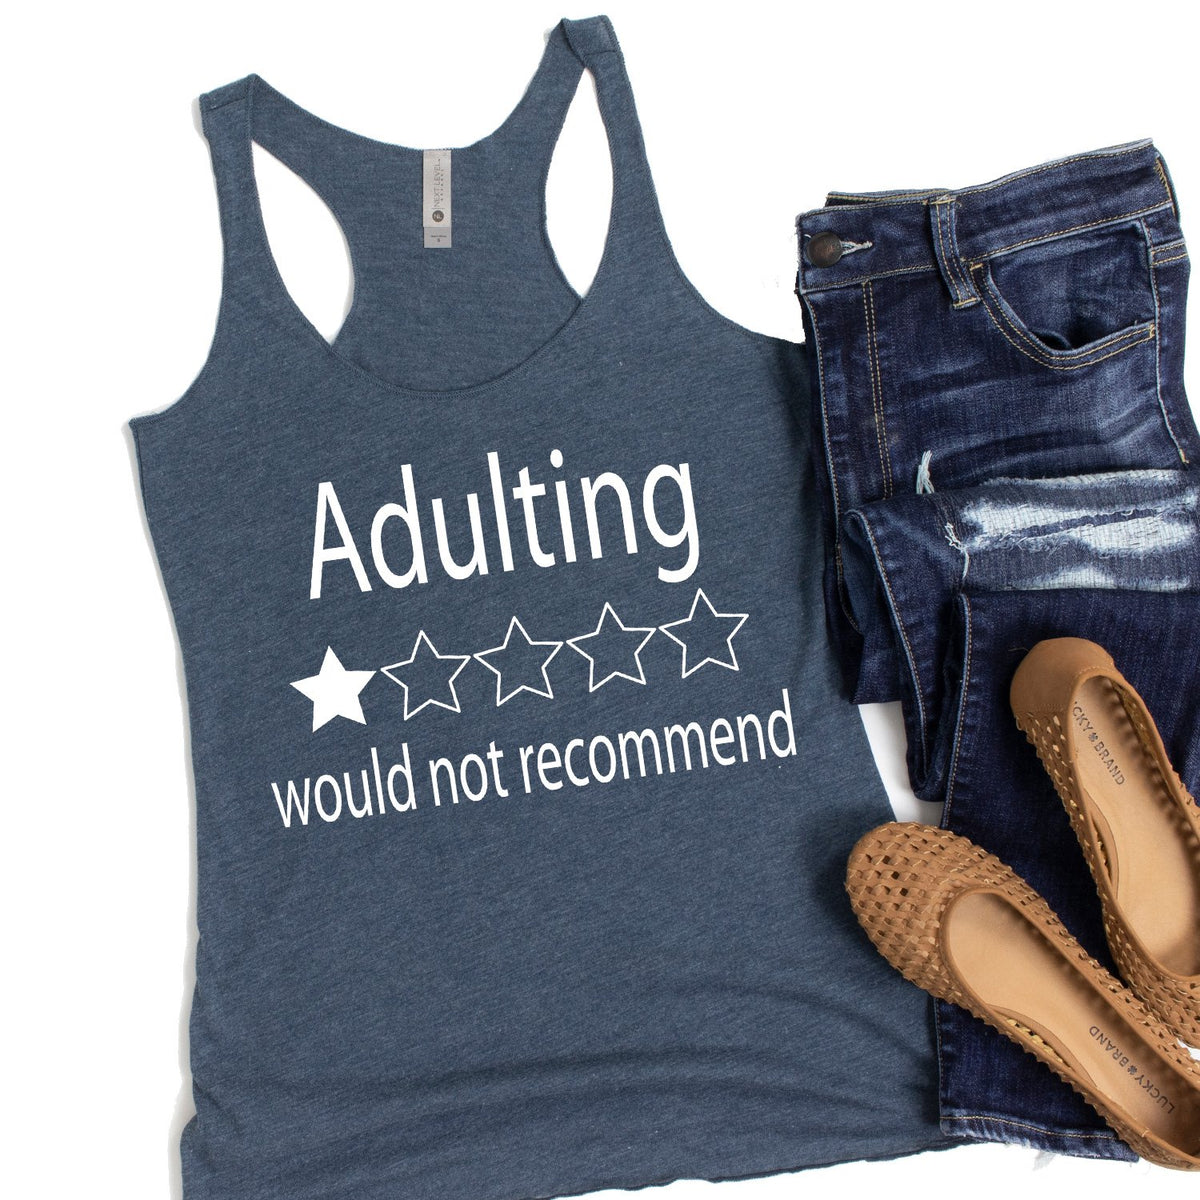 Adulting Would Not Recommend - Tank Top Racerback